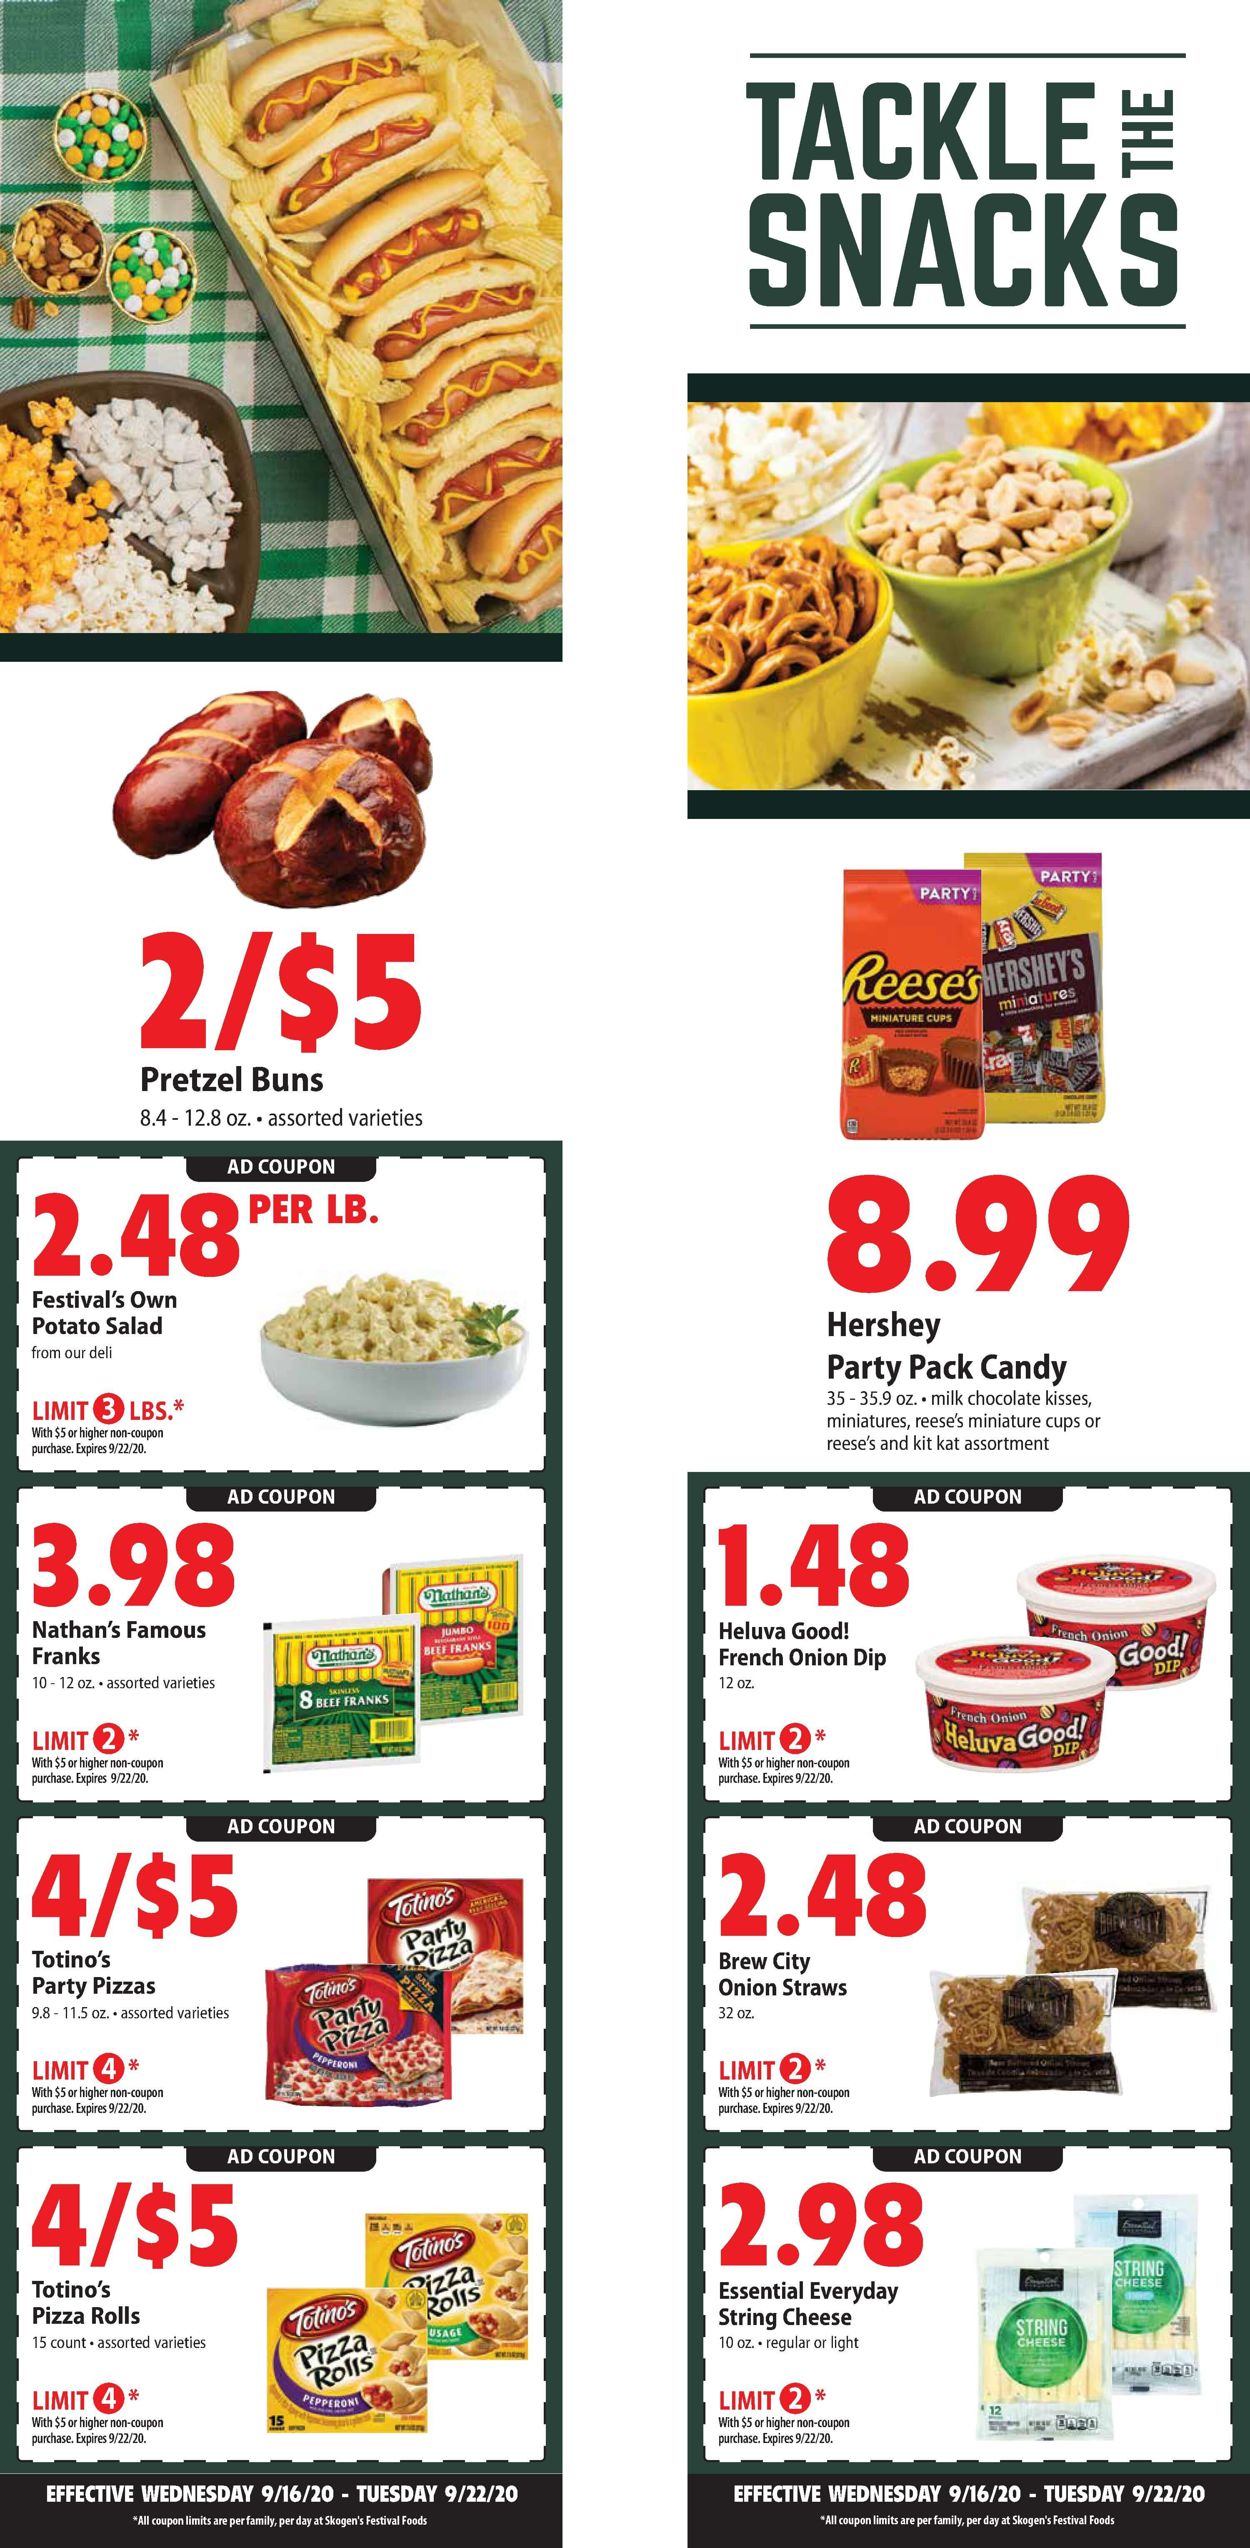 Festival Foods Current weekly ad 09/16 - 09/22/2020 [2] - frequent-ads.com